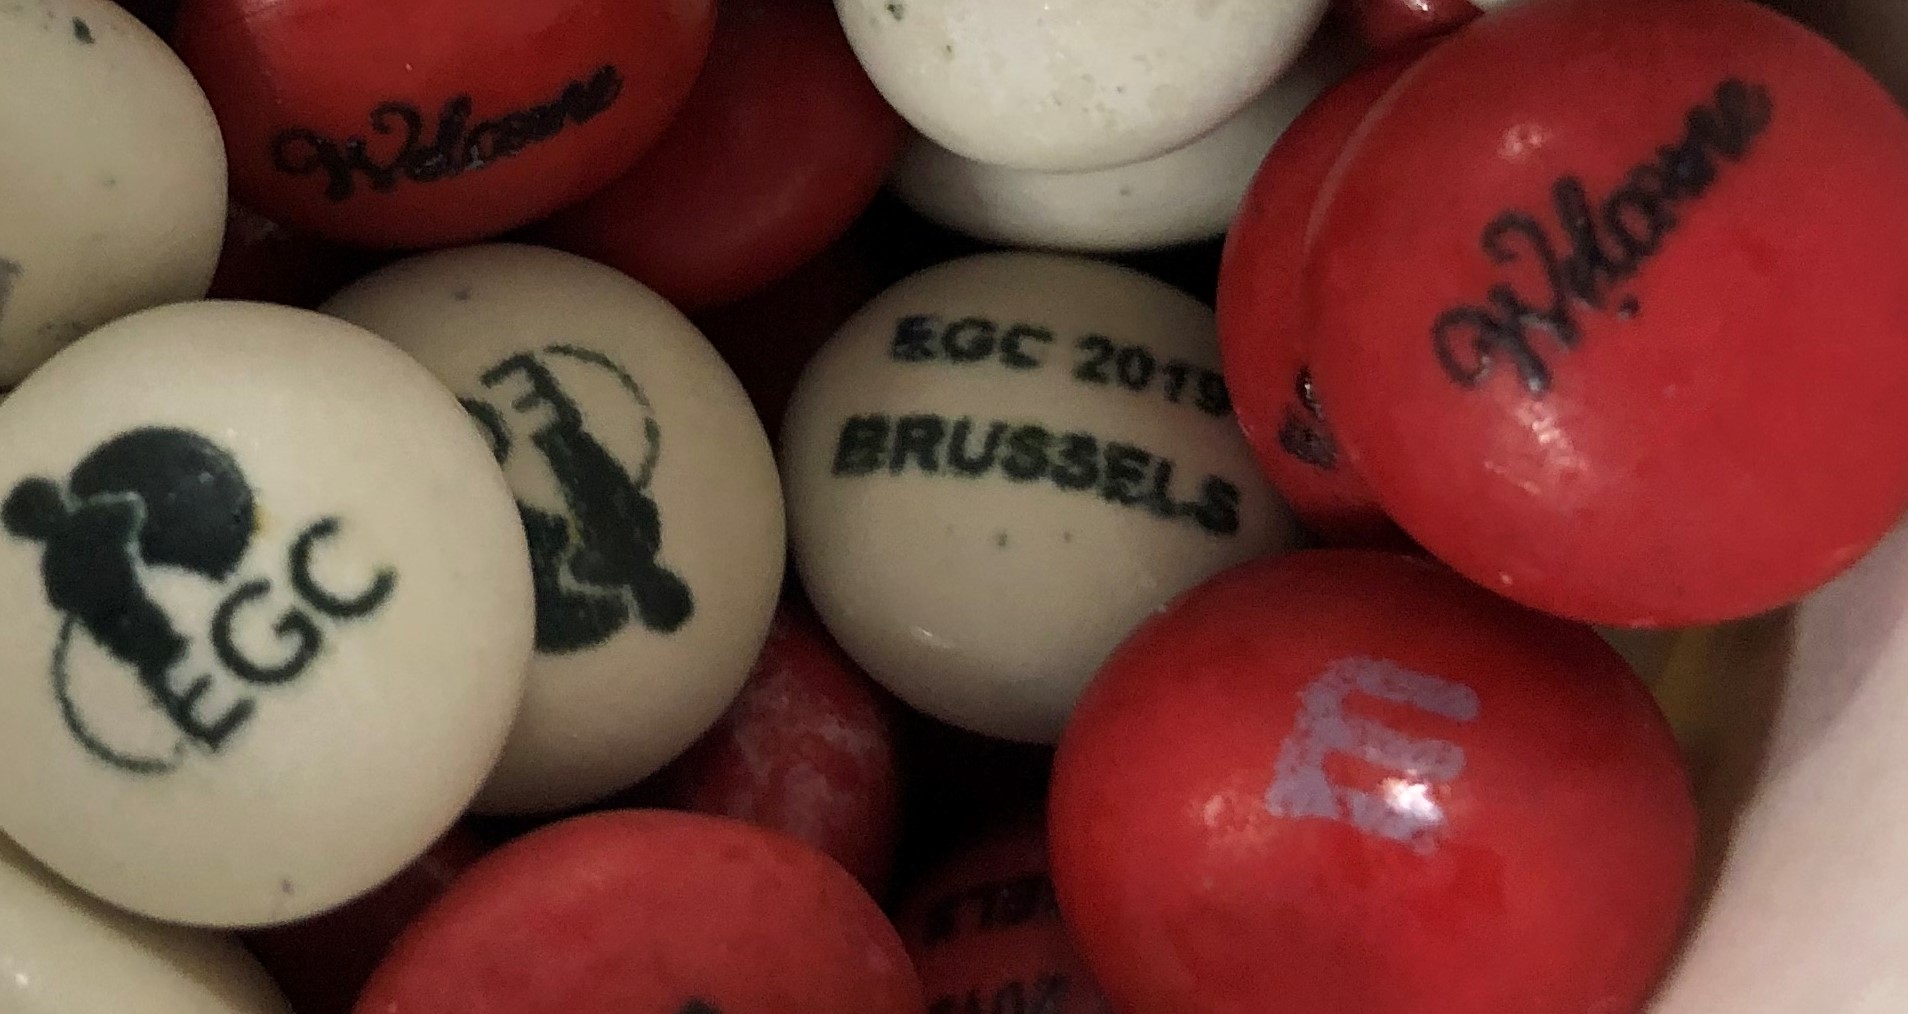 European Championship 2019 in Brussels, day 6